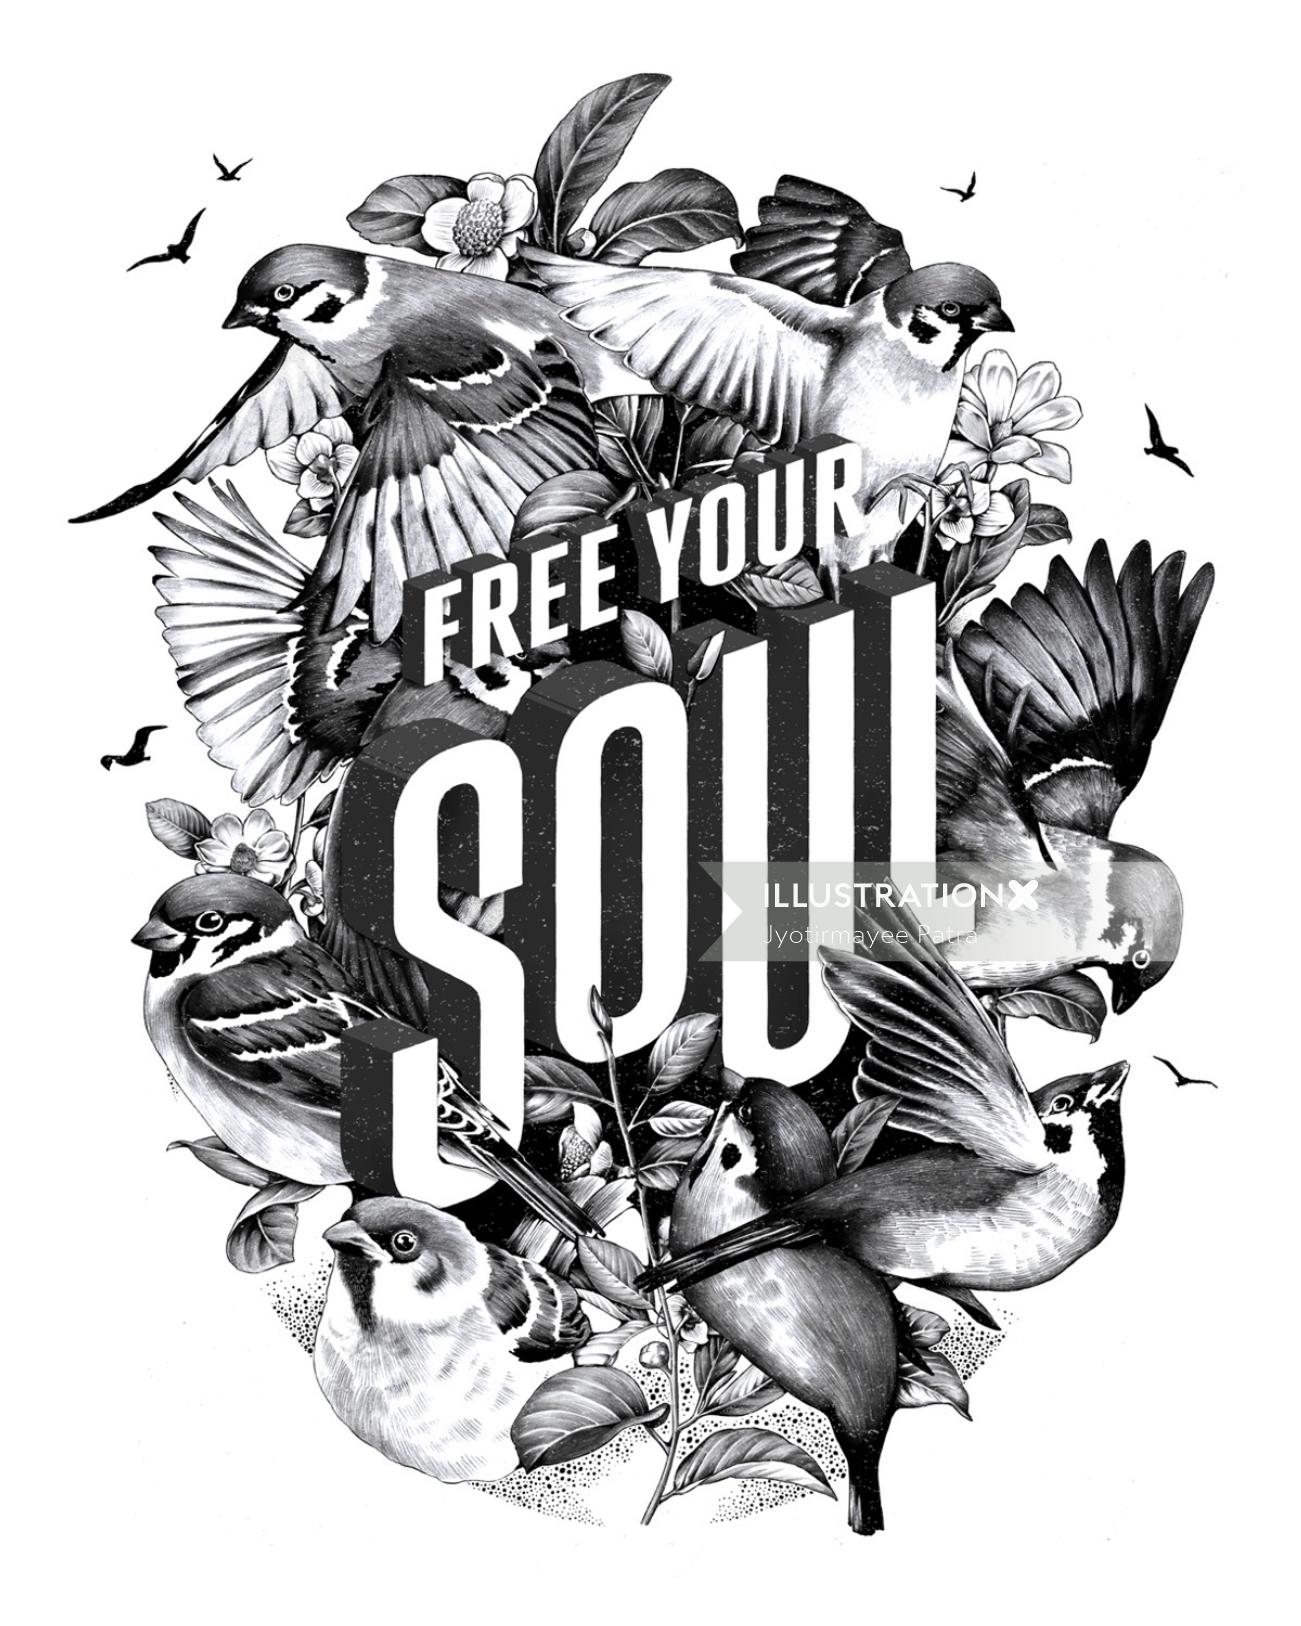 Free your soul hand-lettered art piece from the series ‘Art of Living’.